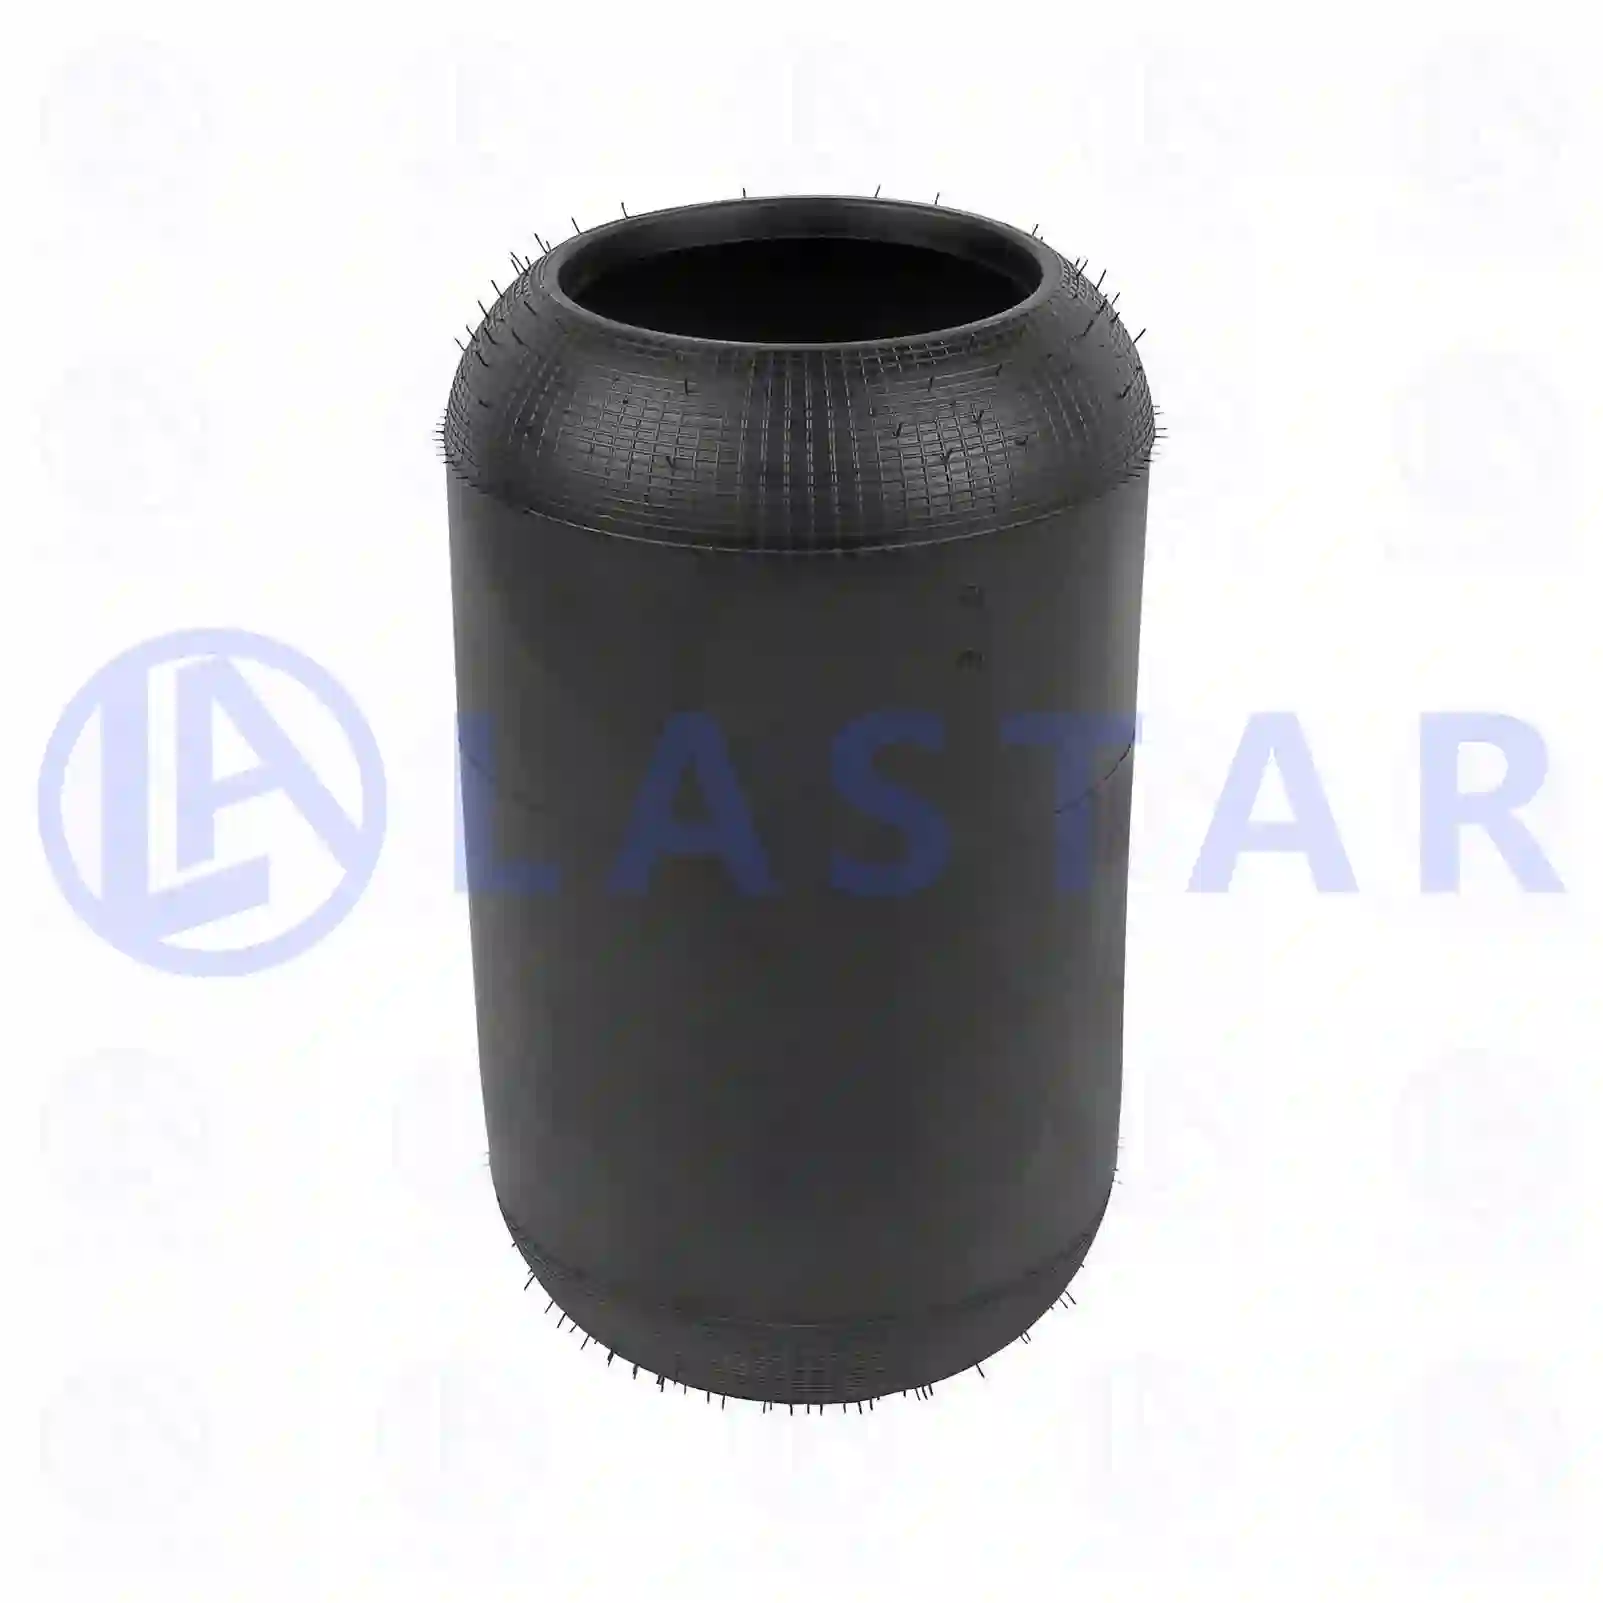 Air spring, without piston, 77729670, 70377054, ZG40820-0008, , ||  77729670 Lastar Spare Part | Truck Spare Parts, Auotomotive Spare Parts Air spring, without piston, 77729670, 70377054, ZG40820-0008, , ||  77729670 Lastar Spare Part | Truck Spare Parts, Auotomotive Spare Parts